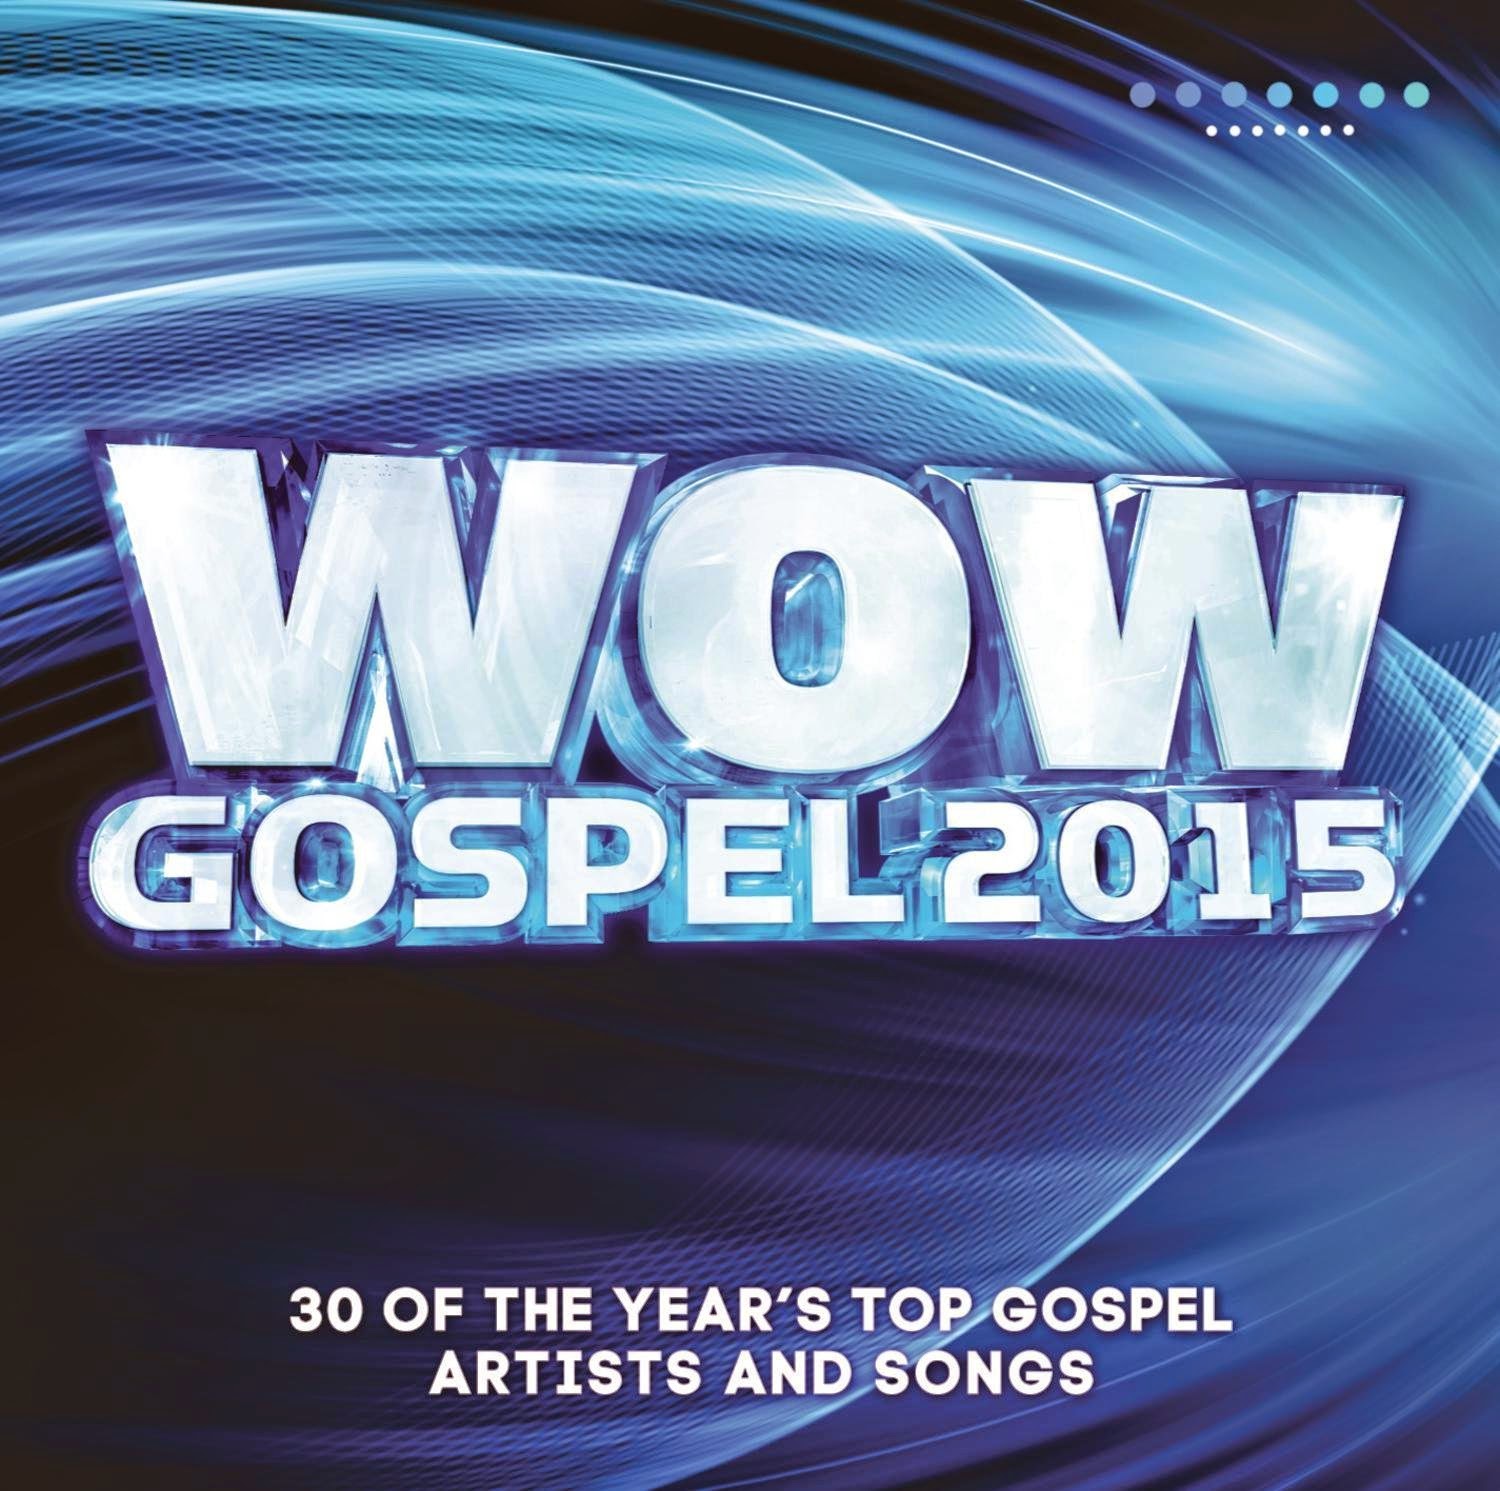 Various Artists - wow gospel 2015 English Christian Songs Download